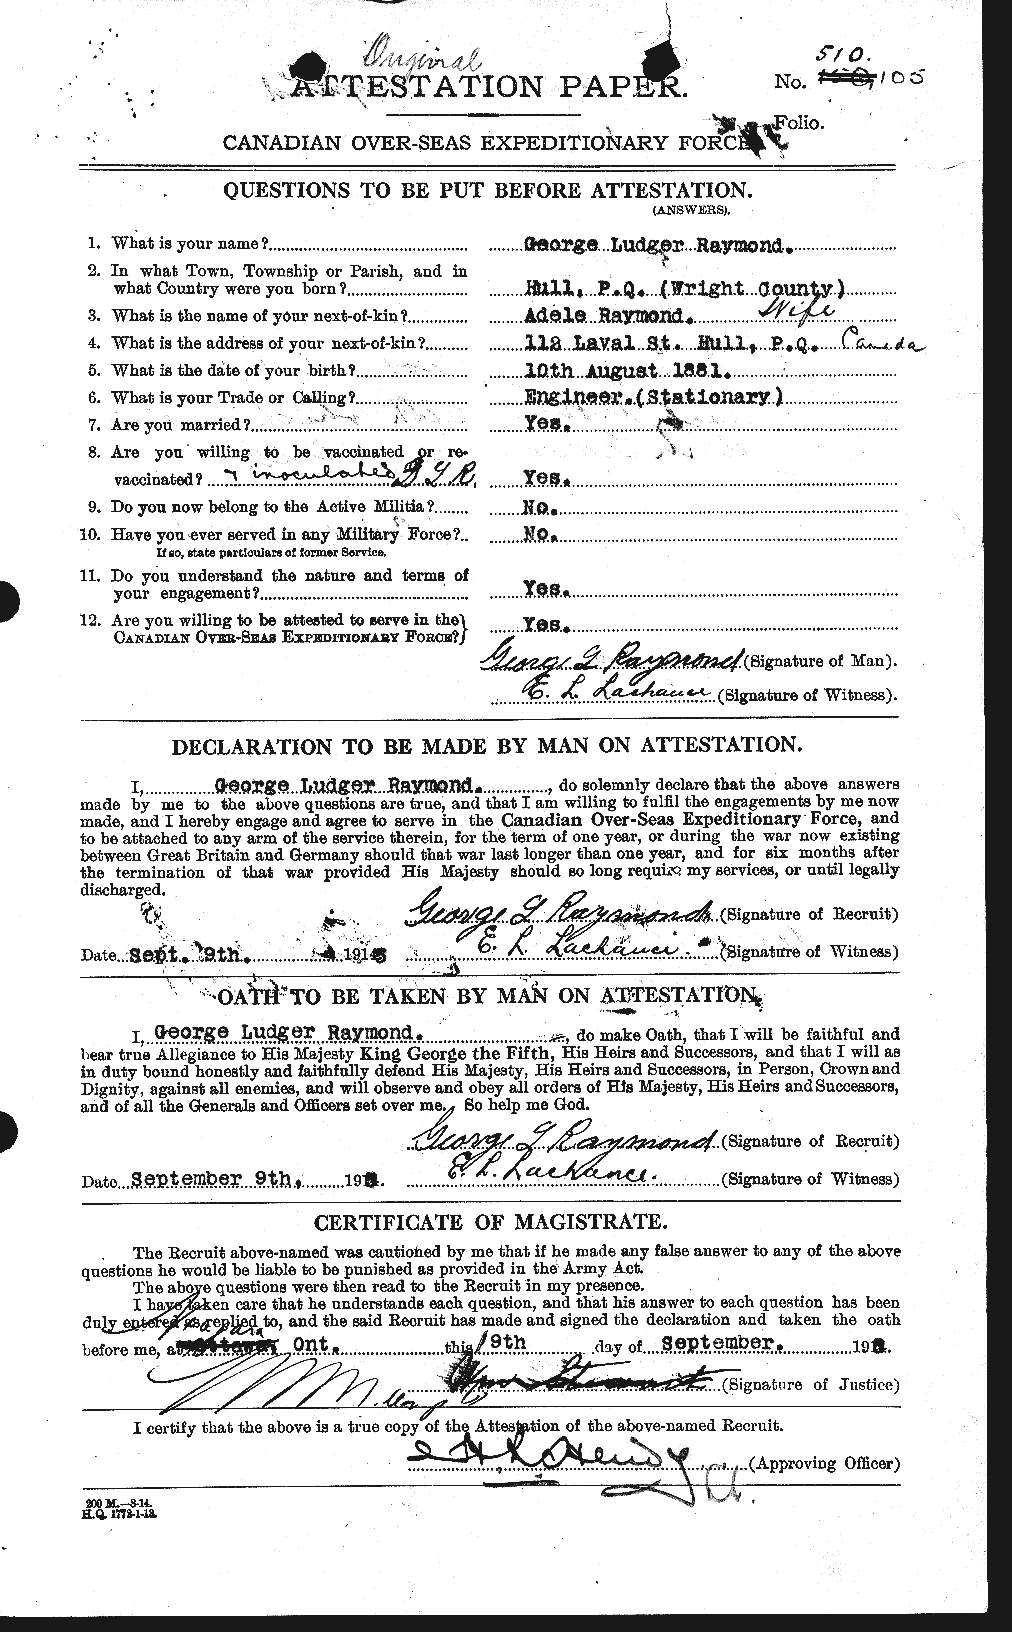 Personnel Records of the First World War - CEF 595344a